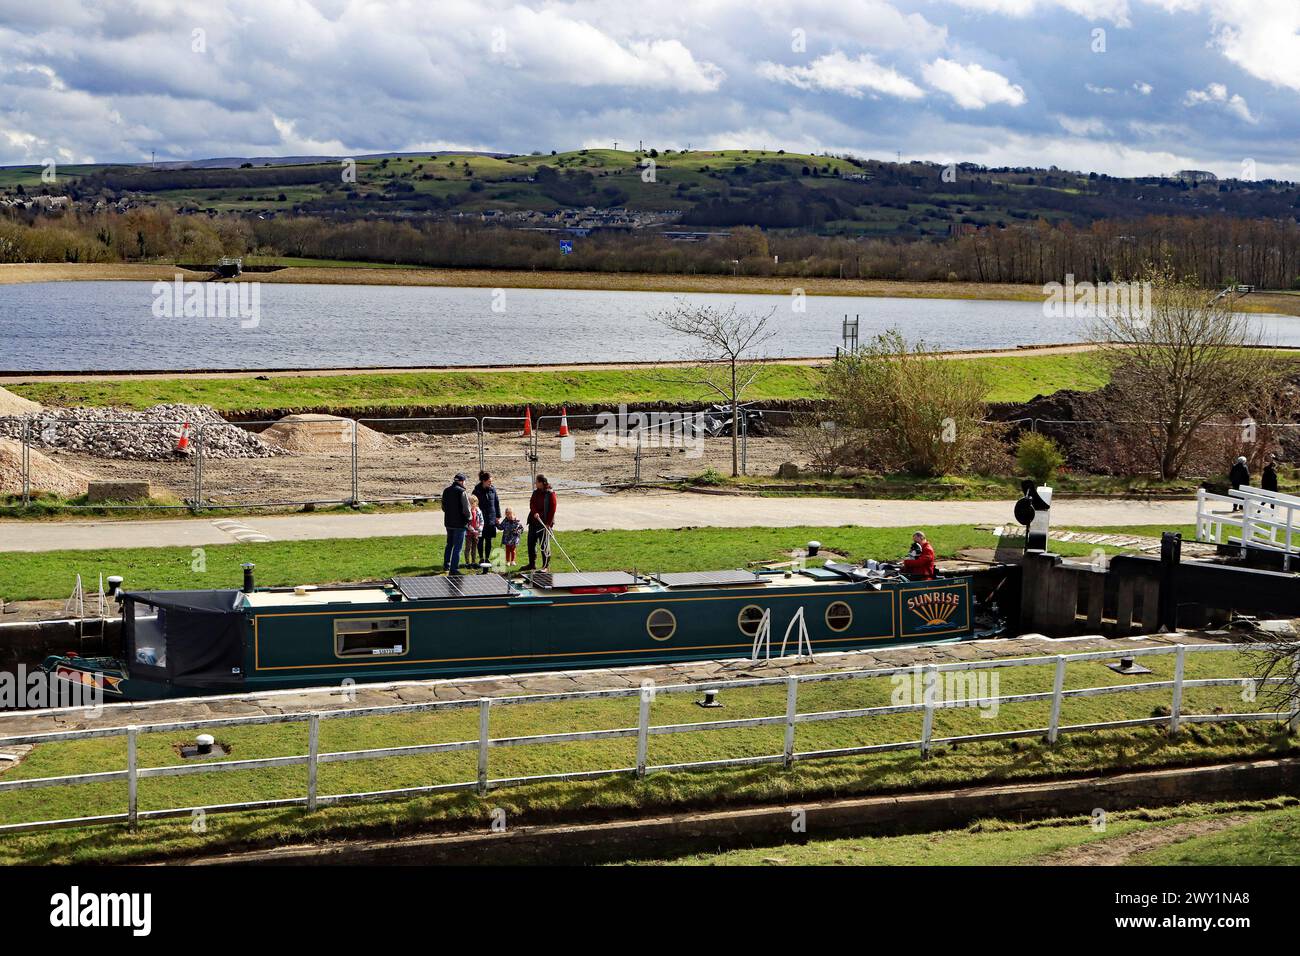 The water in Barrowford reservoir shines in the spring East Lancashire sunshine on Good Friday as a narrowboat rises up through a lock Stock Photo